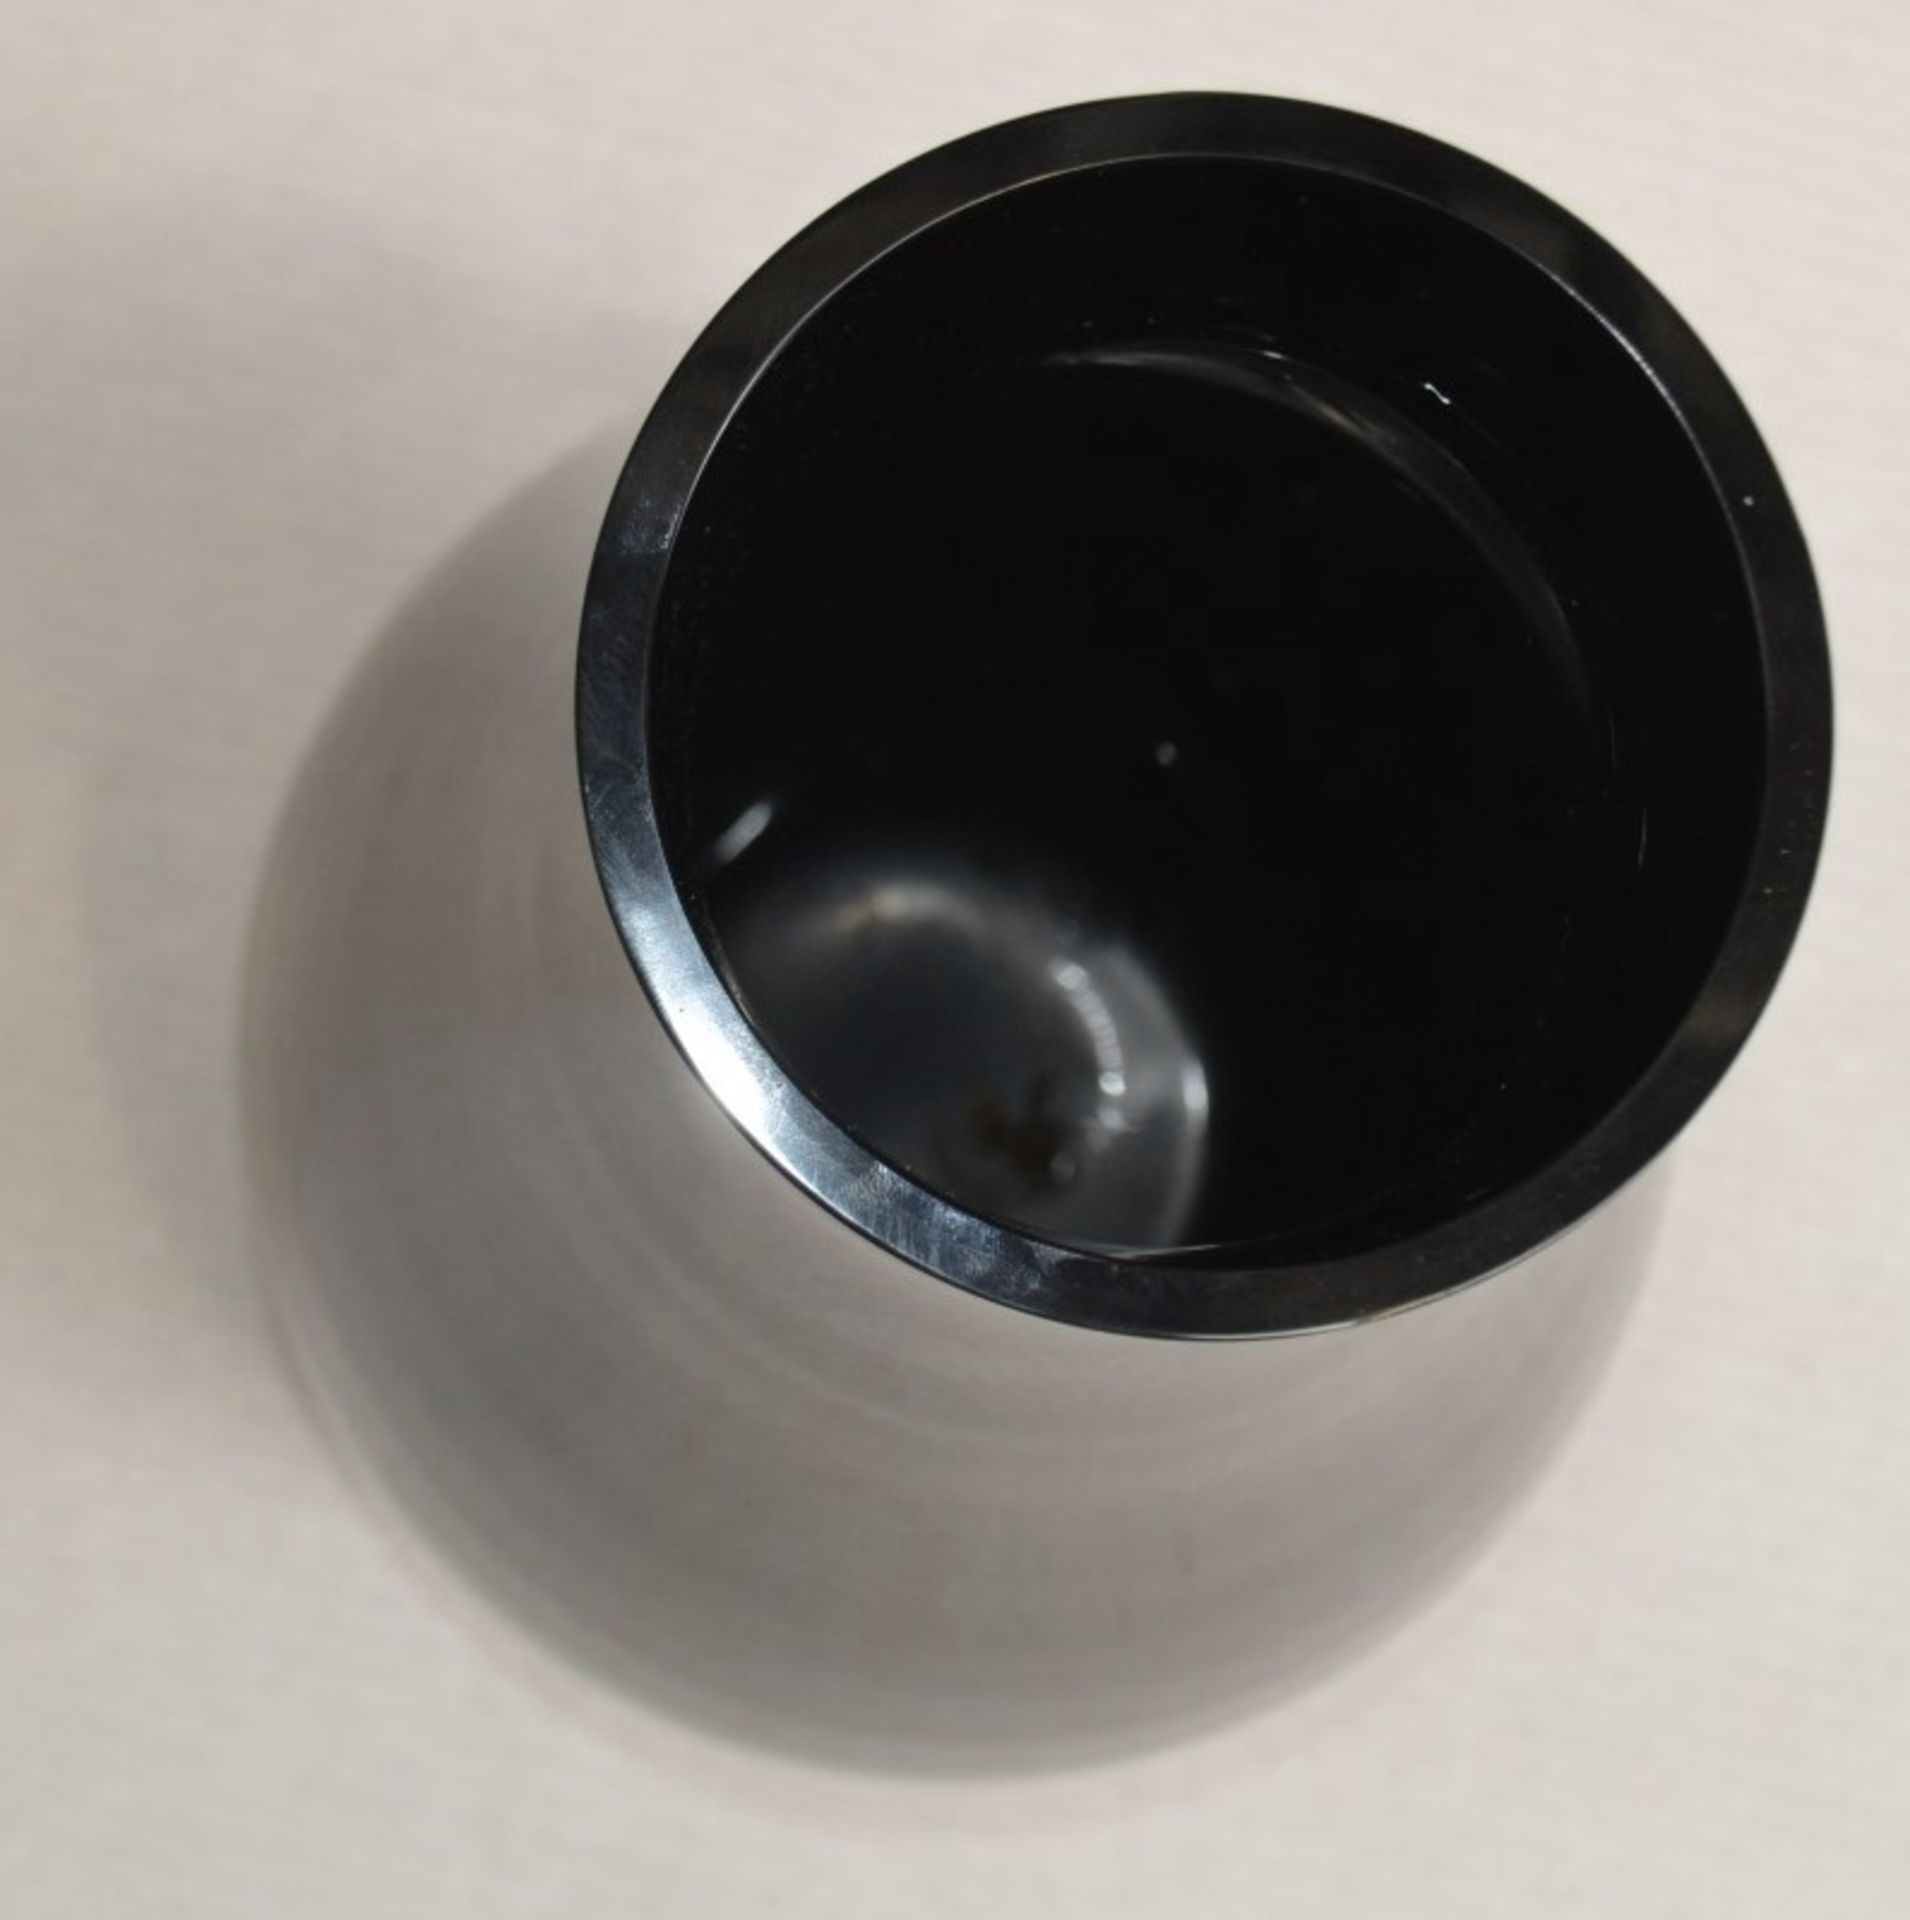 1 x Large Flower Vase In Black Glass - Preowned, From An Exclusive Property - Dimensions: H56 x - Image 3 of 5